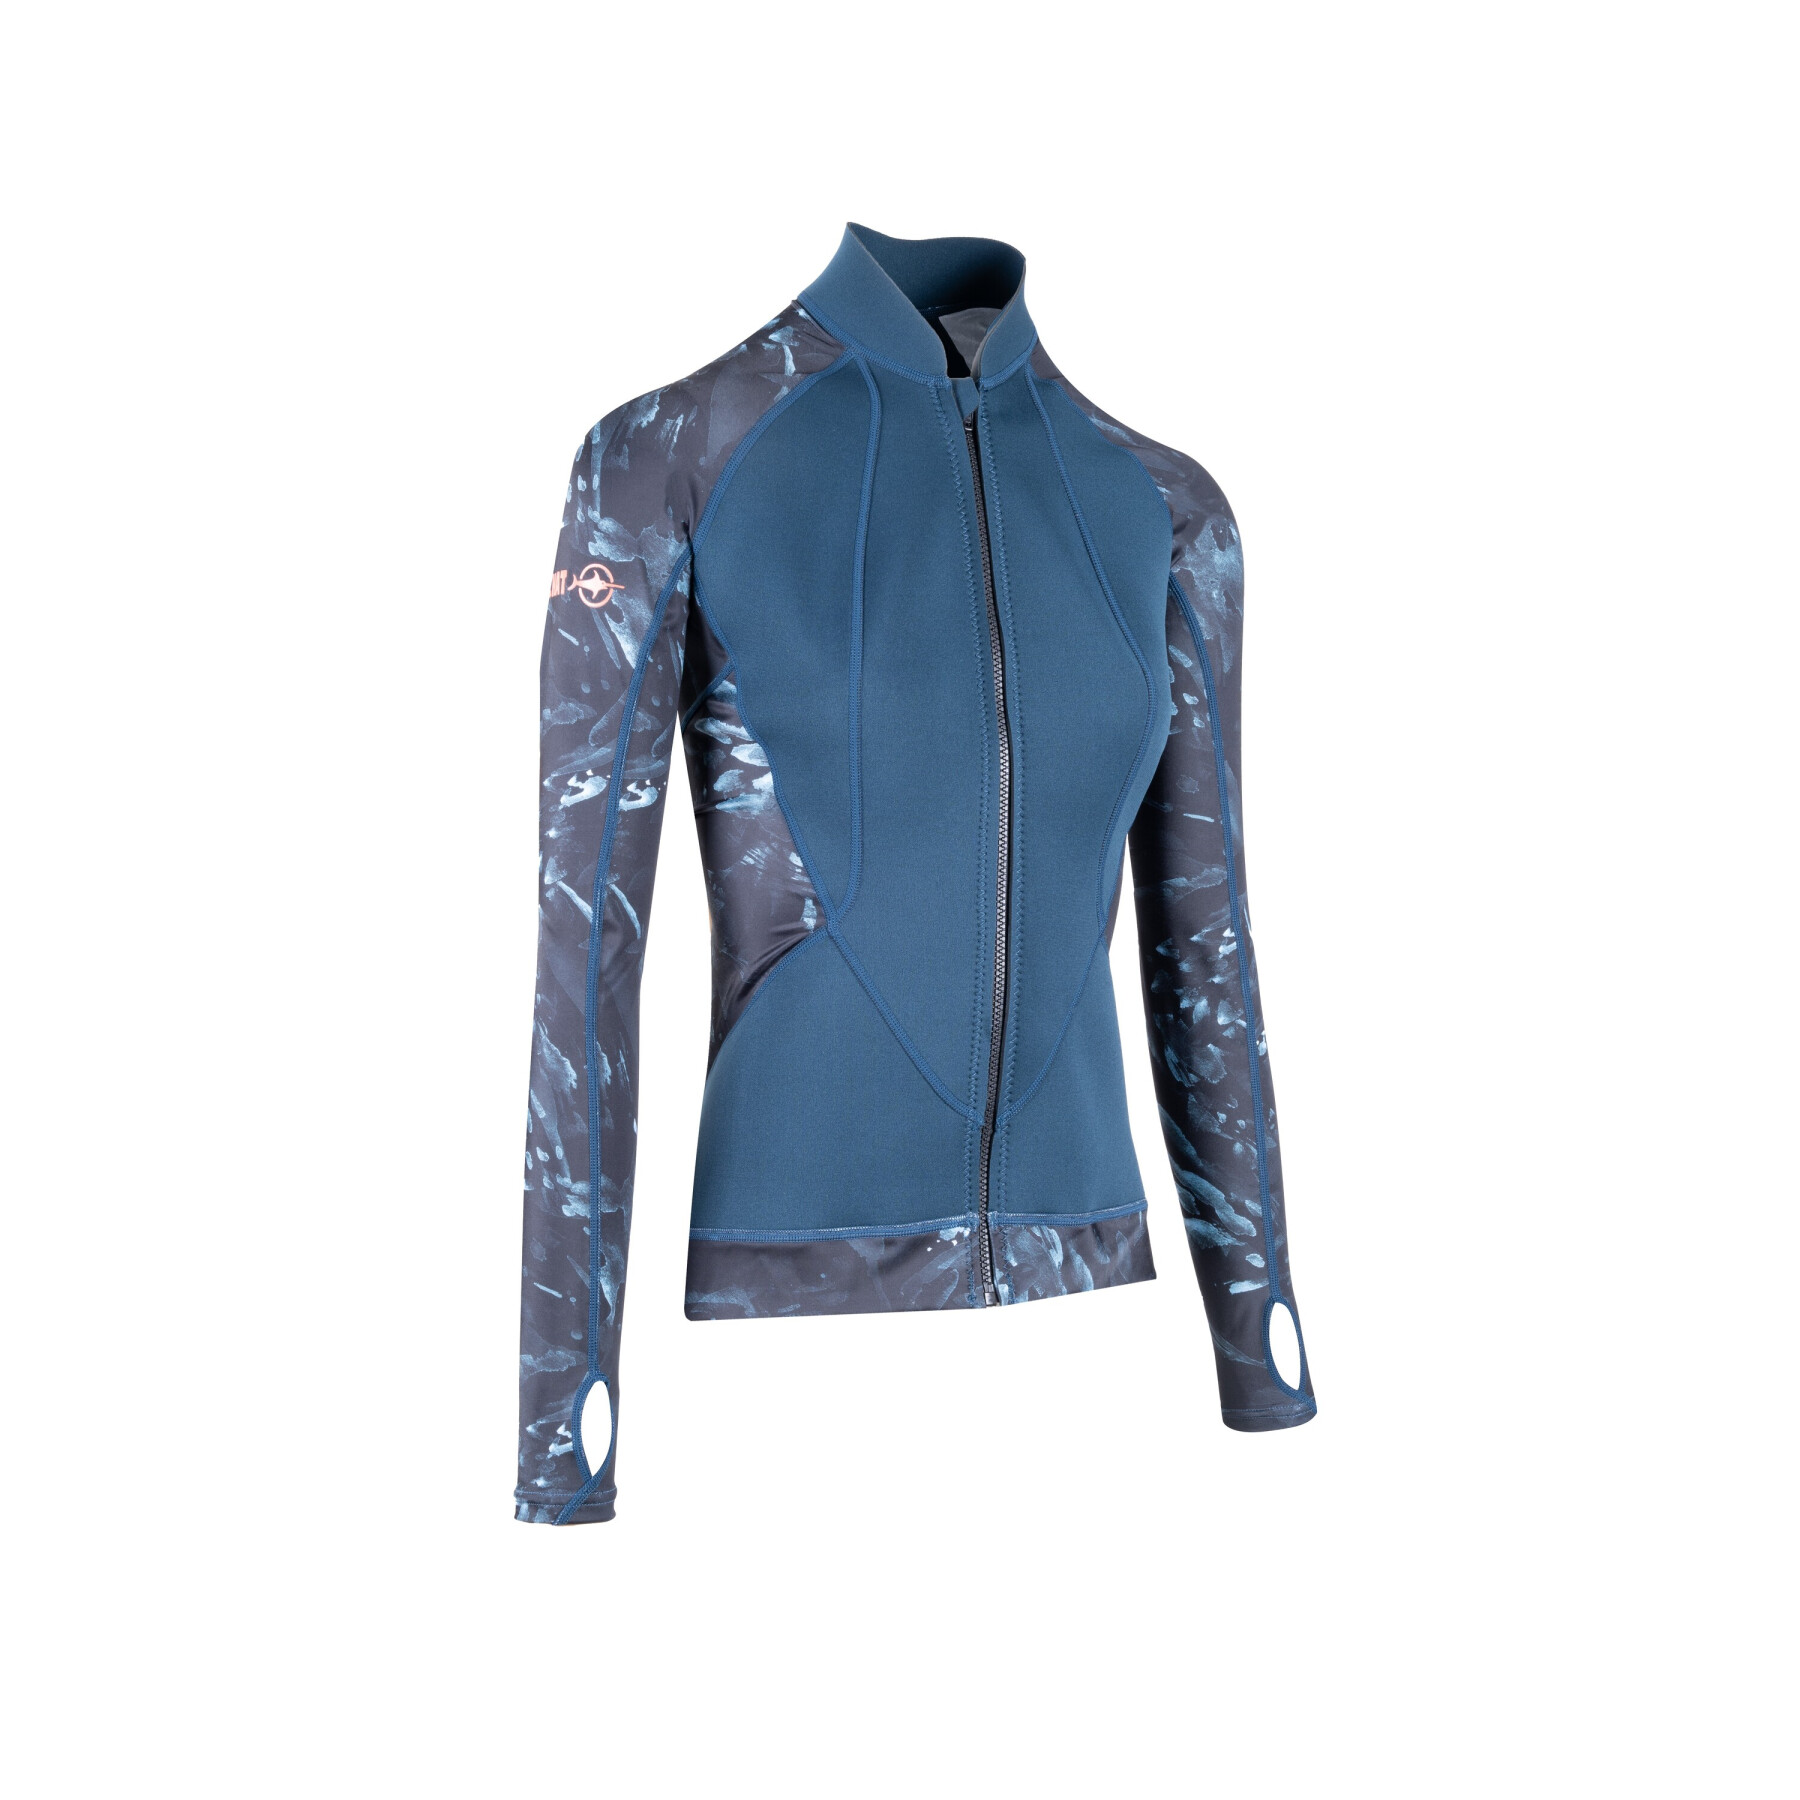 Women's zipped diving jacket Beuchat Atoll